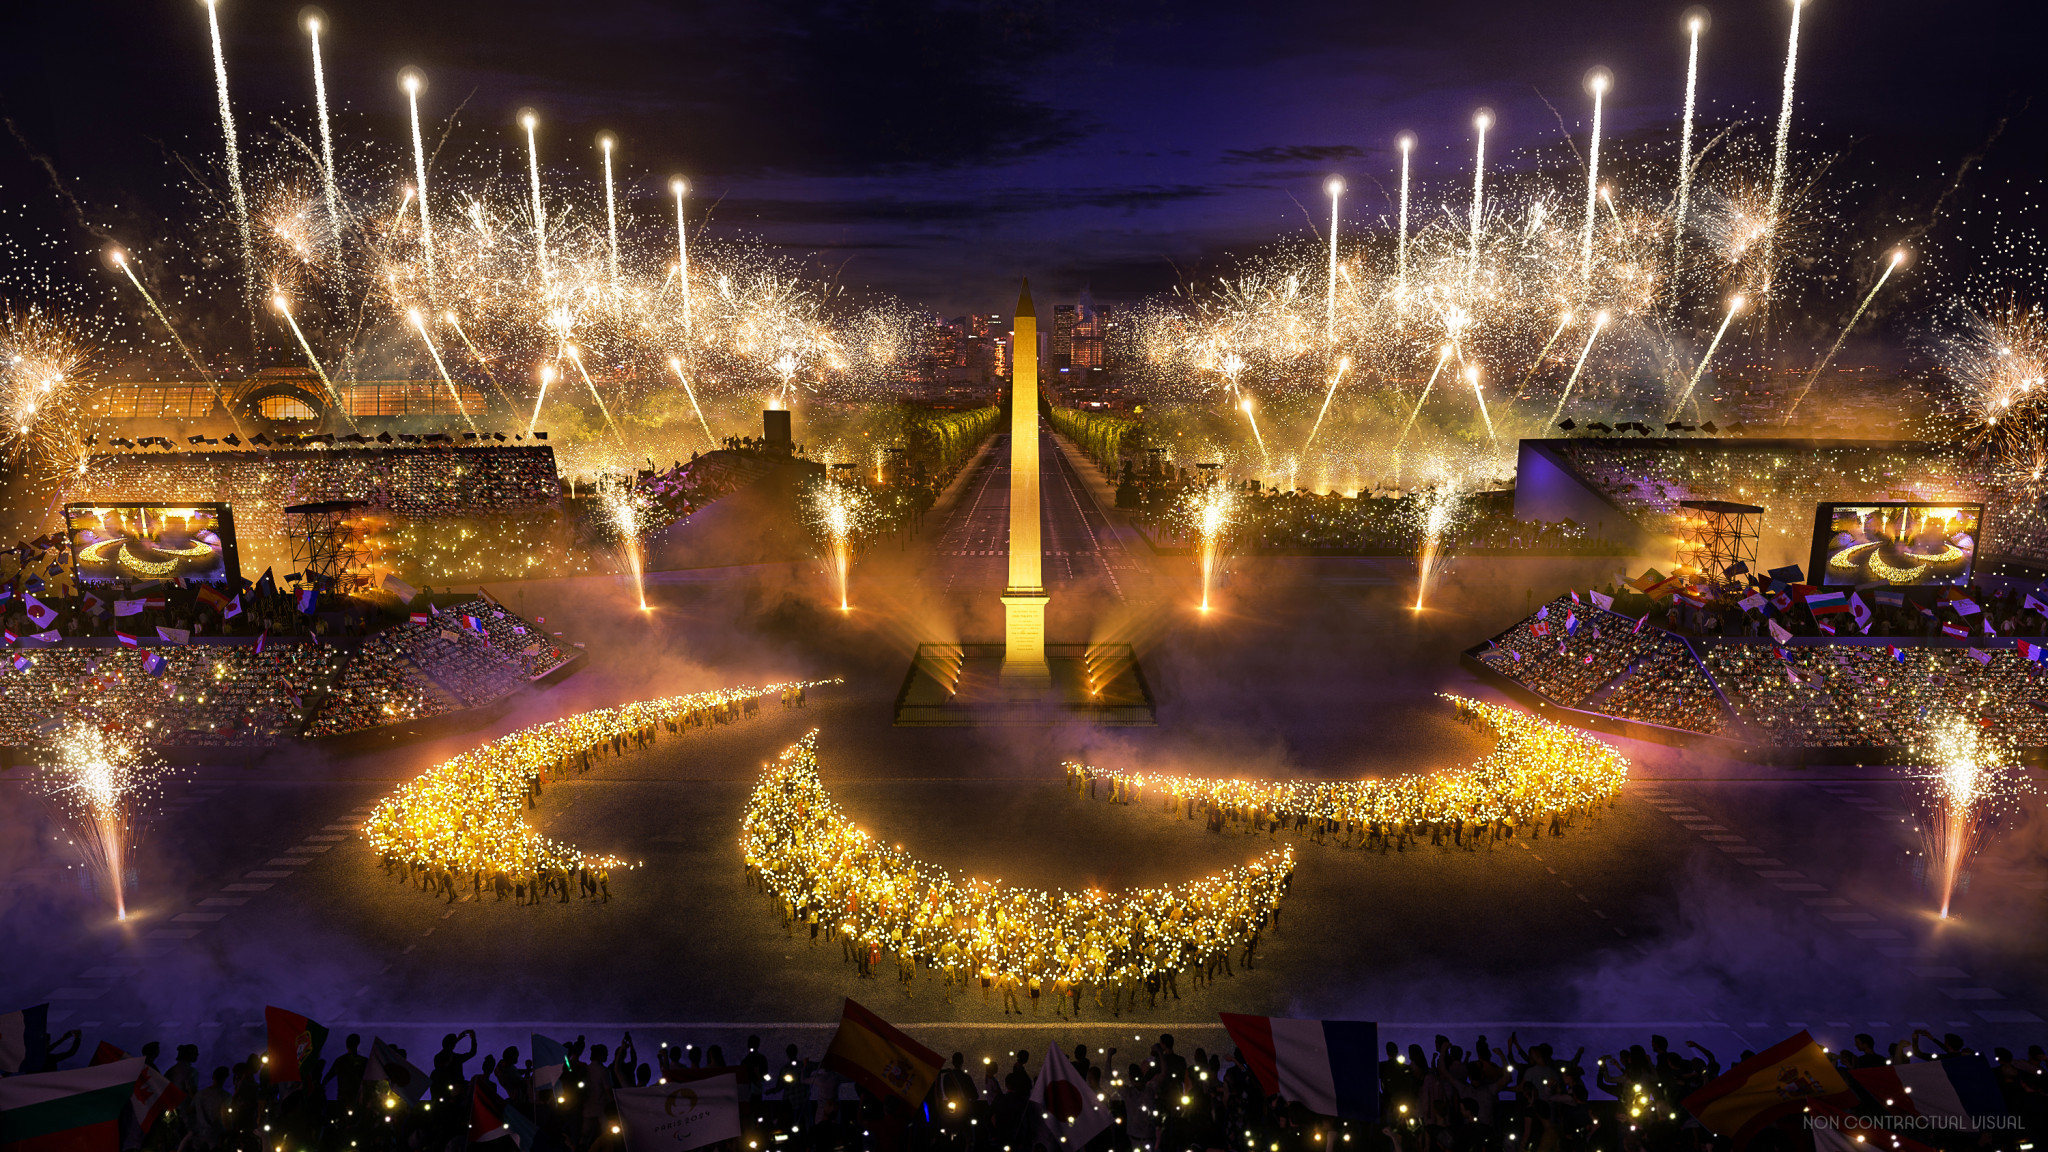 Paris 2024 promises "beautiful spotlight" for Paralympic athletes as Opening Ceremony plans unveiled